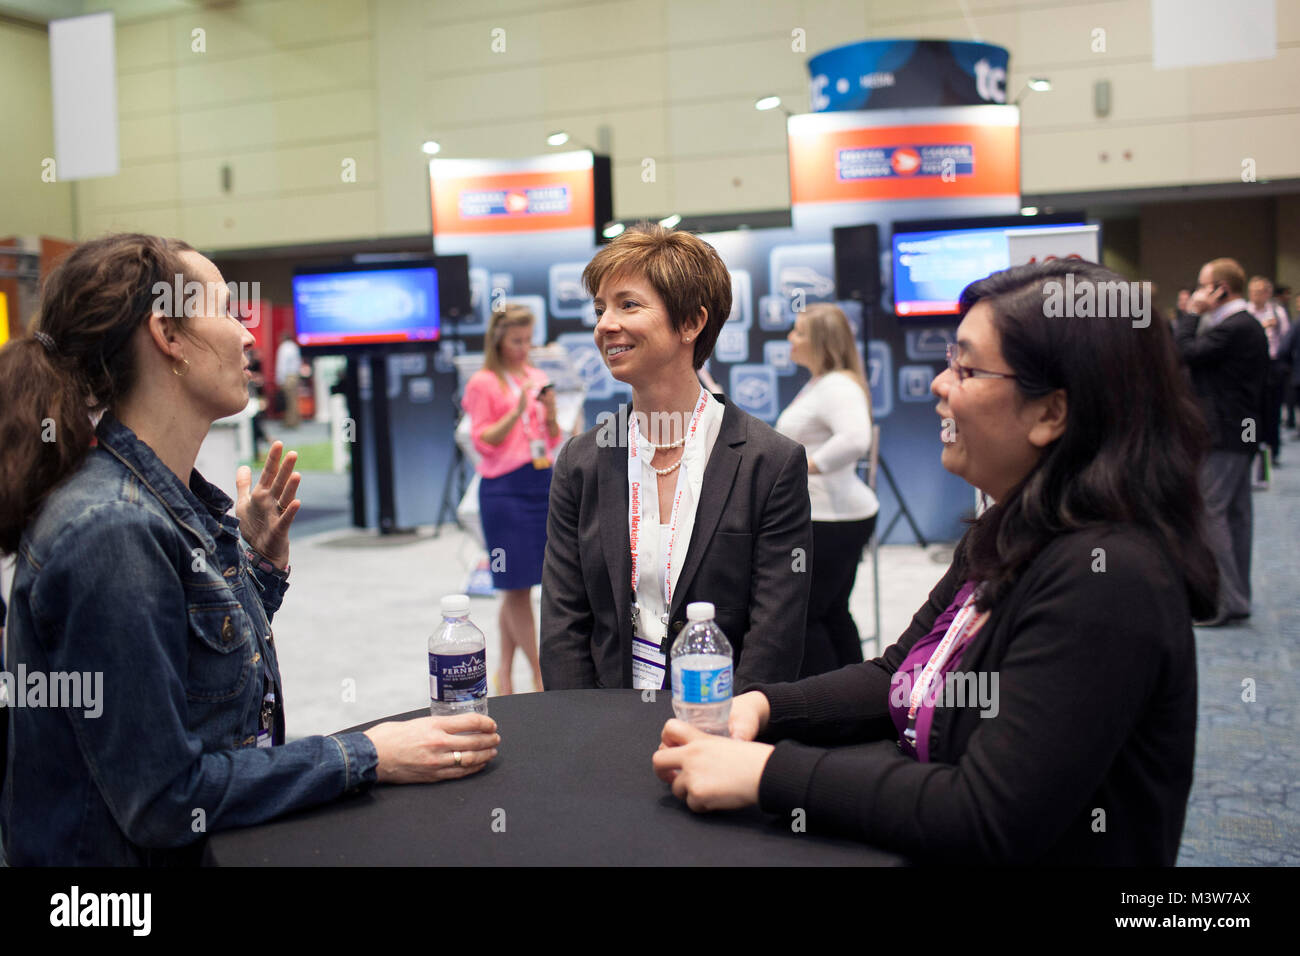 Canada Post Corporation's Marketing Manager Nadia Chegrinec, left, Director of Business Marketing Donna Reid and Manager of Marketing Research Angie Kwong speak during a break at the Art of Marketing conference in Toronto, Ontario, Canada on Wednesday, June 05, 2013. The conference hosted speakers and vendors geared towards the new age of marketing, including keynote speaker Biz Stone, co-founder and creative director of Twitter. Stock Photo